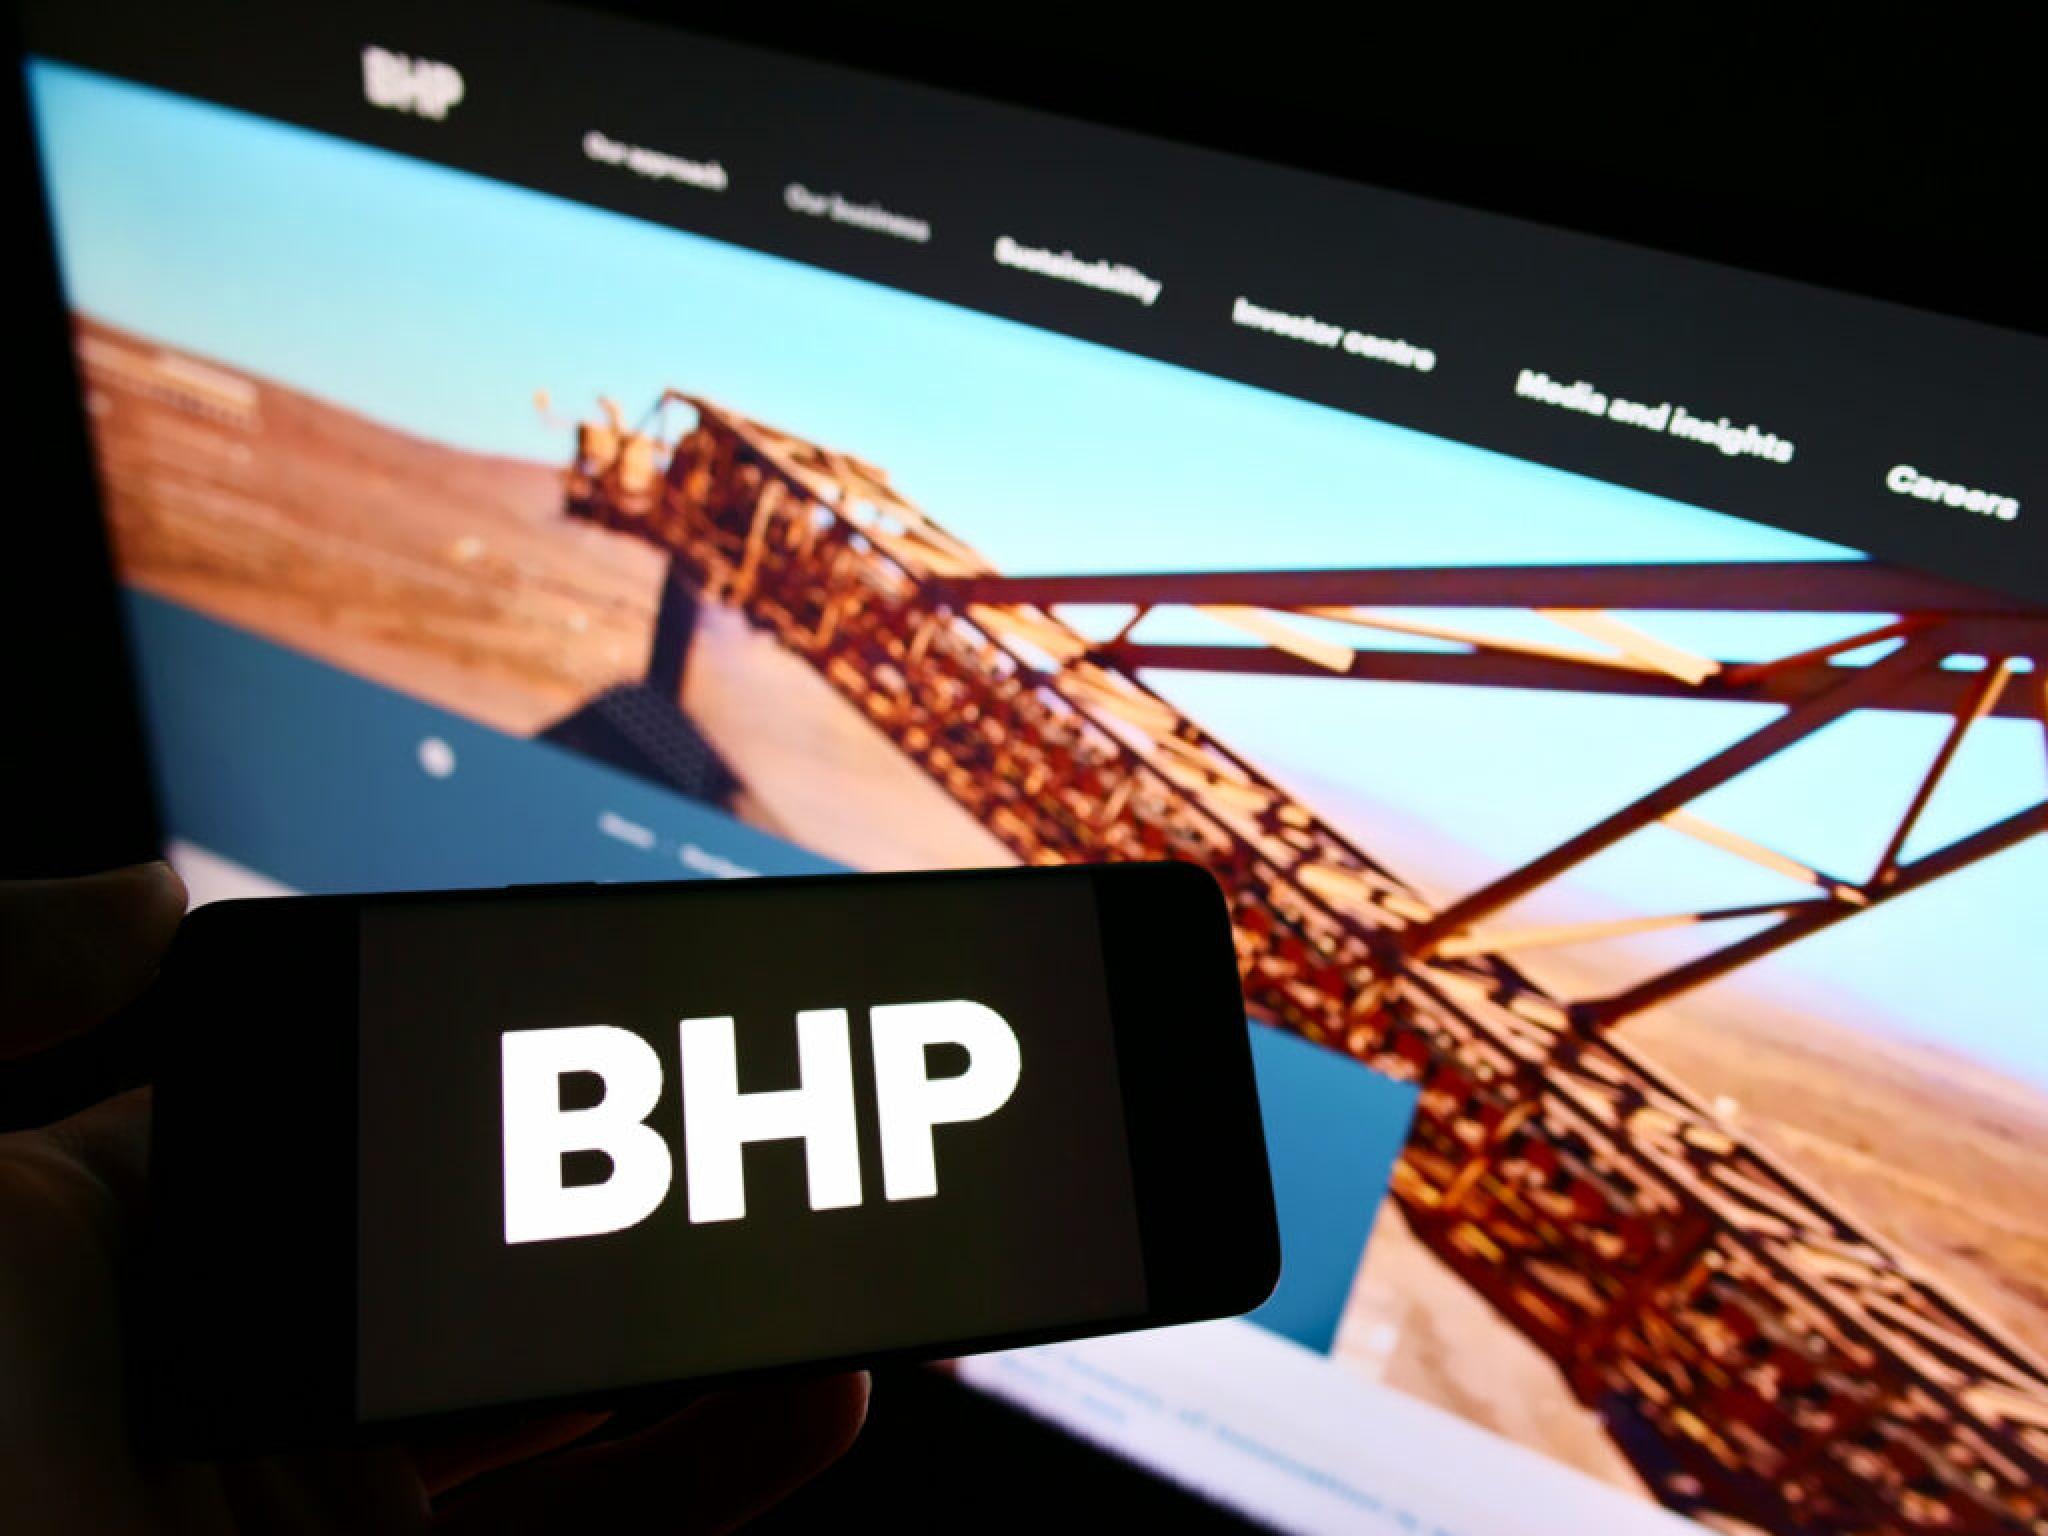  mining-rivals-join-forces-rio-tinto--bhp-partner-on-electric-truck-trials 